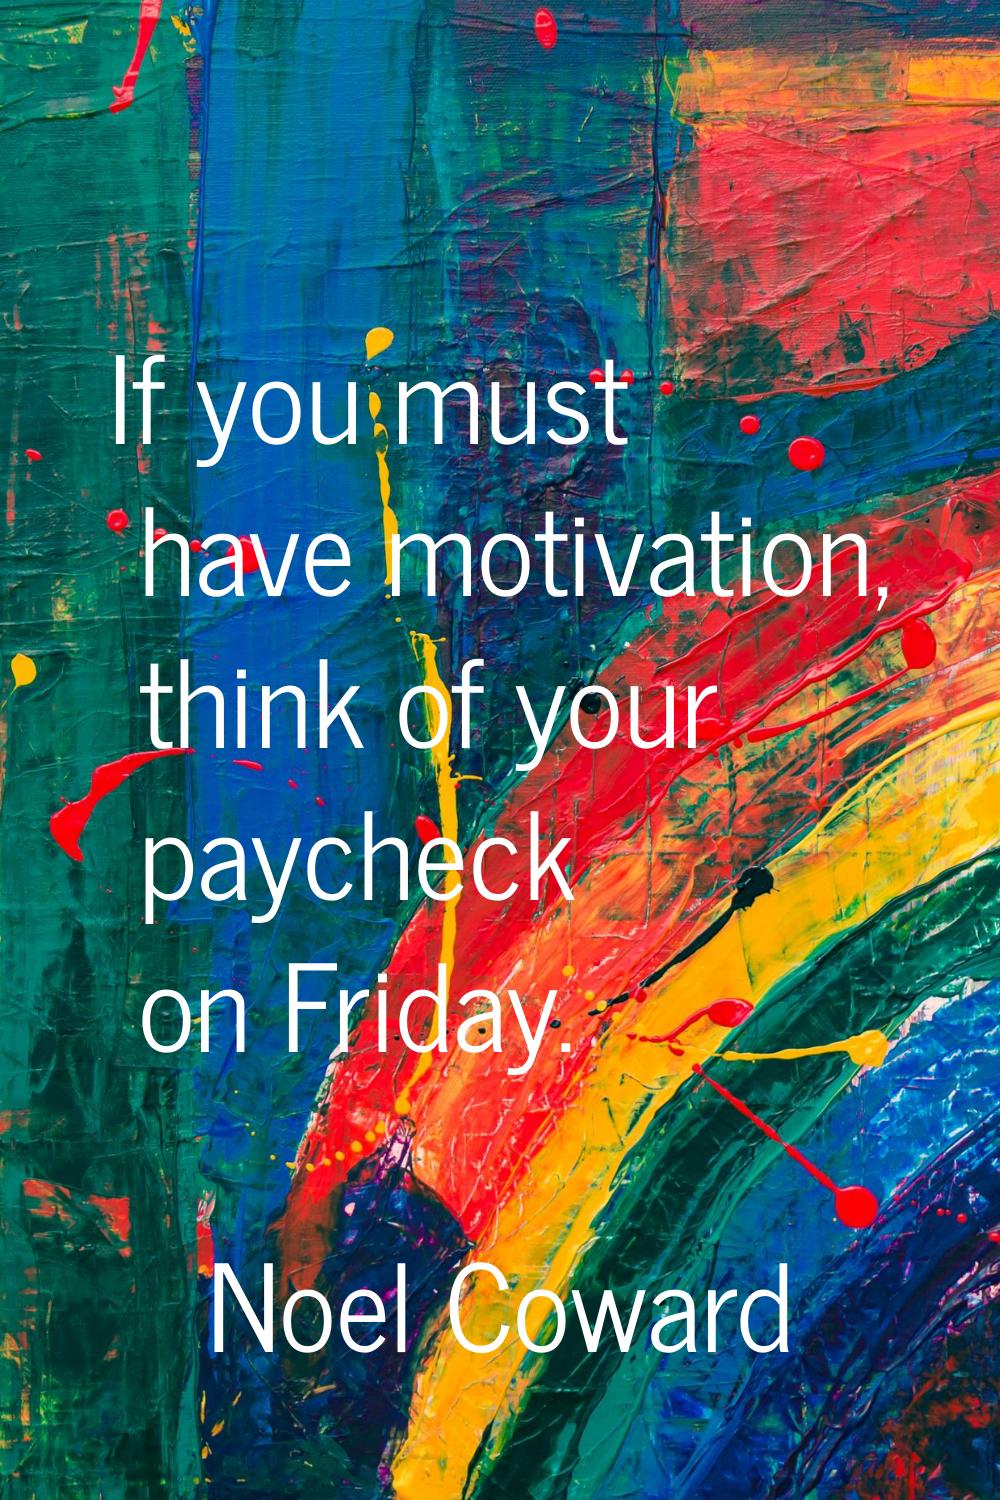 If you must have motivation, think of your paycheck on Friday.